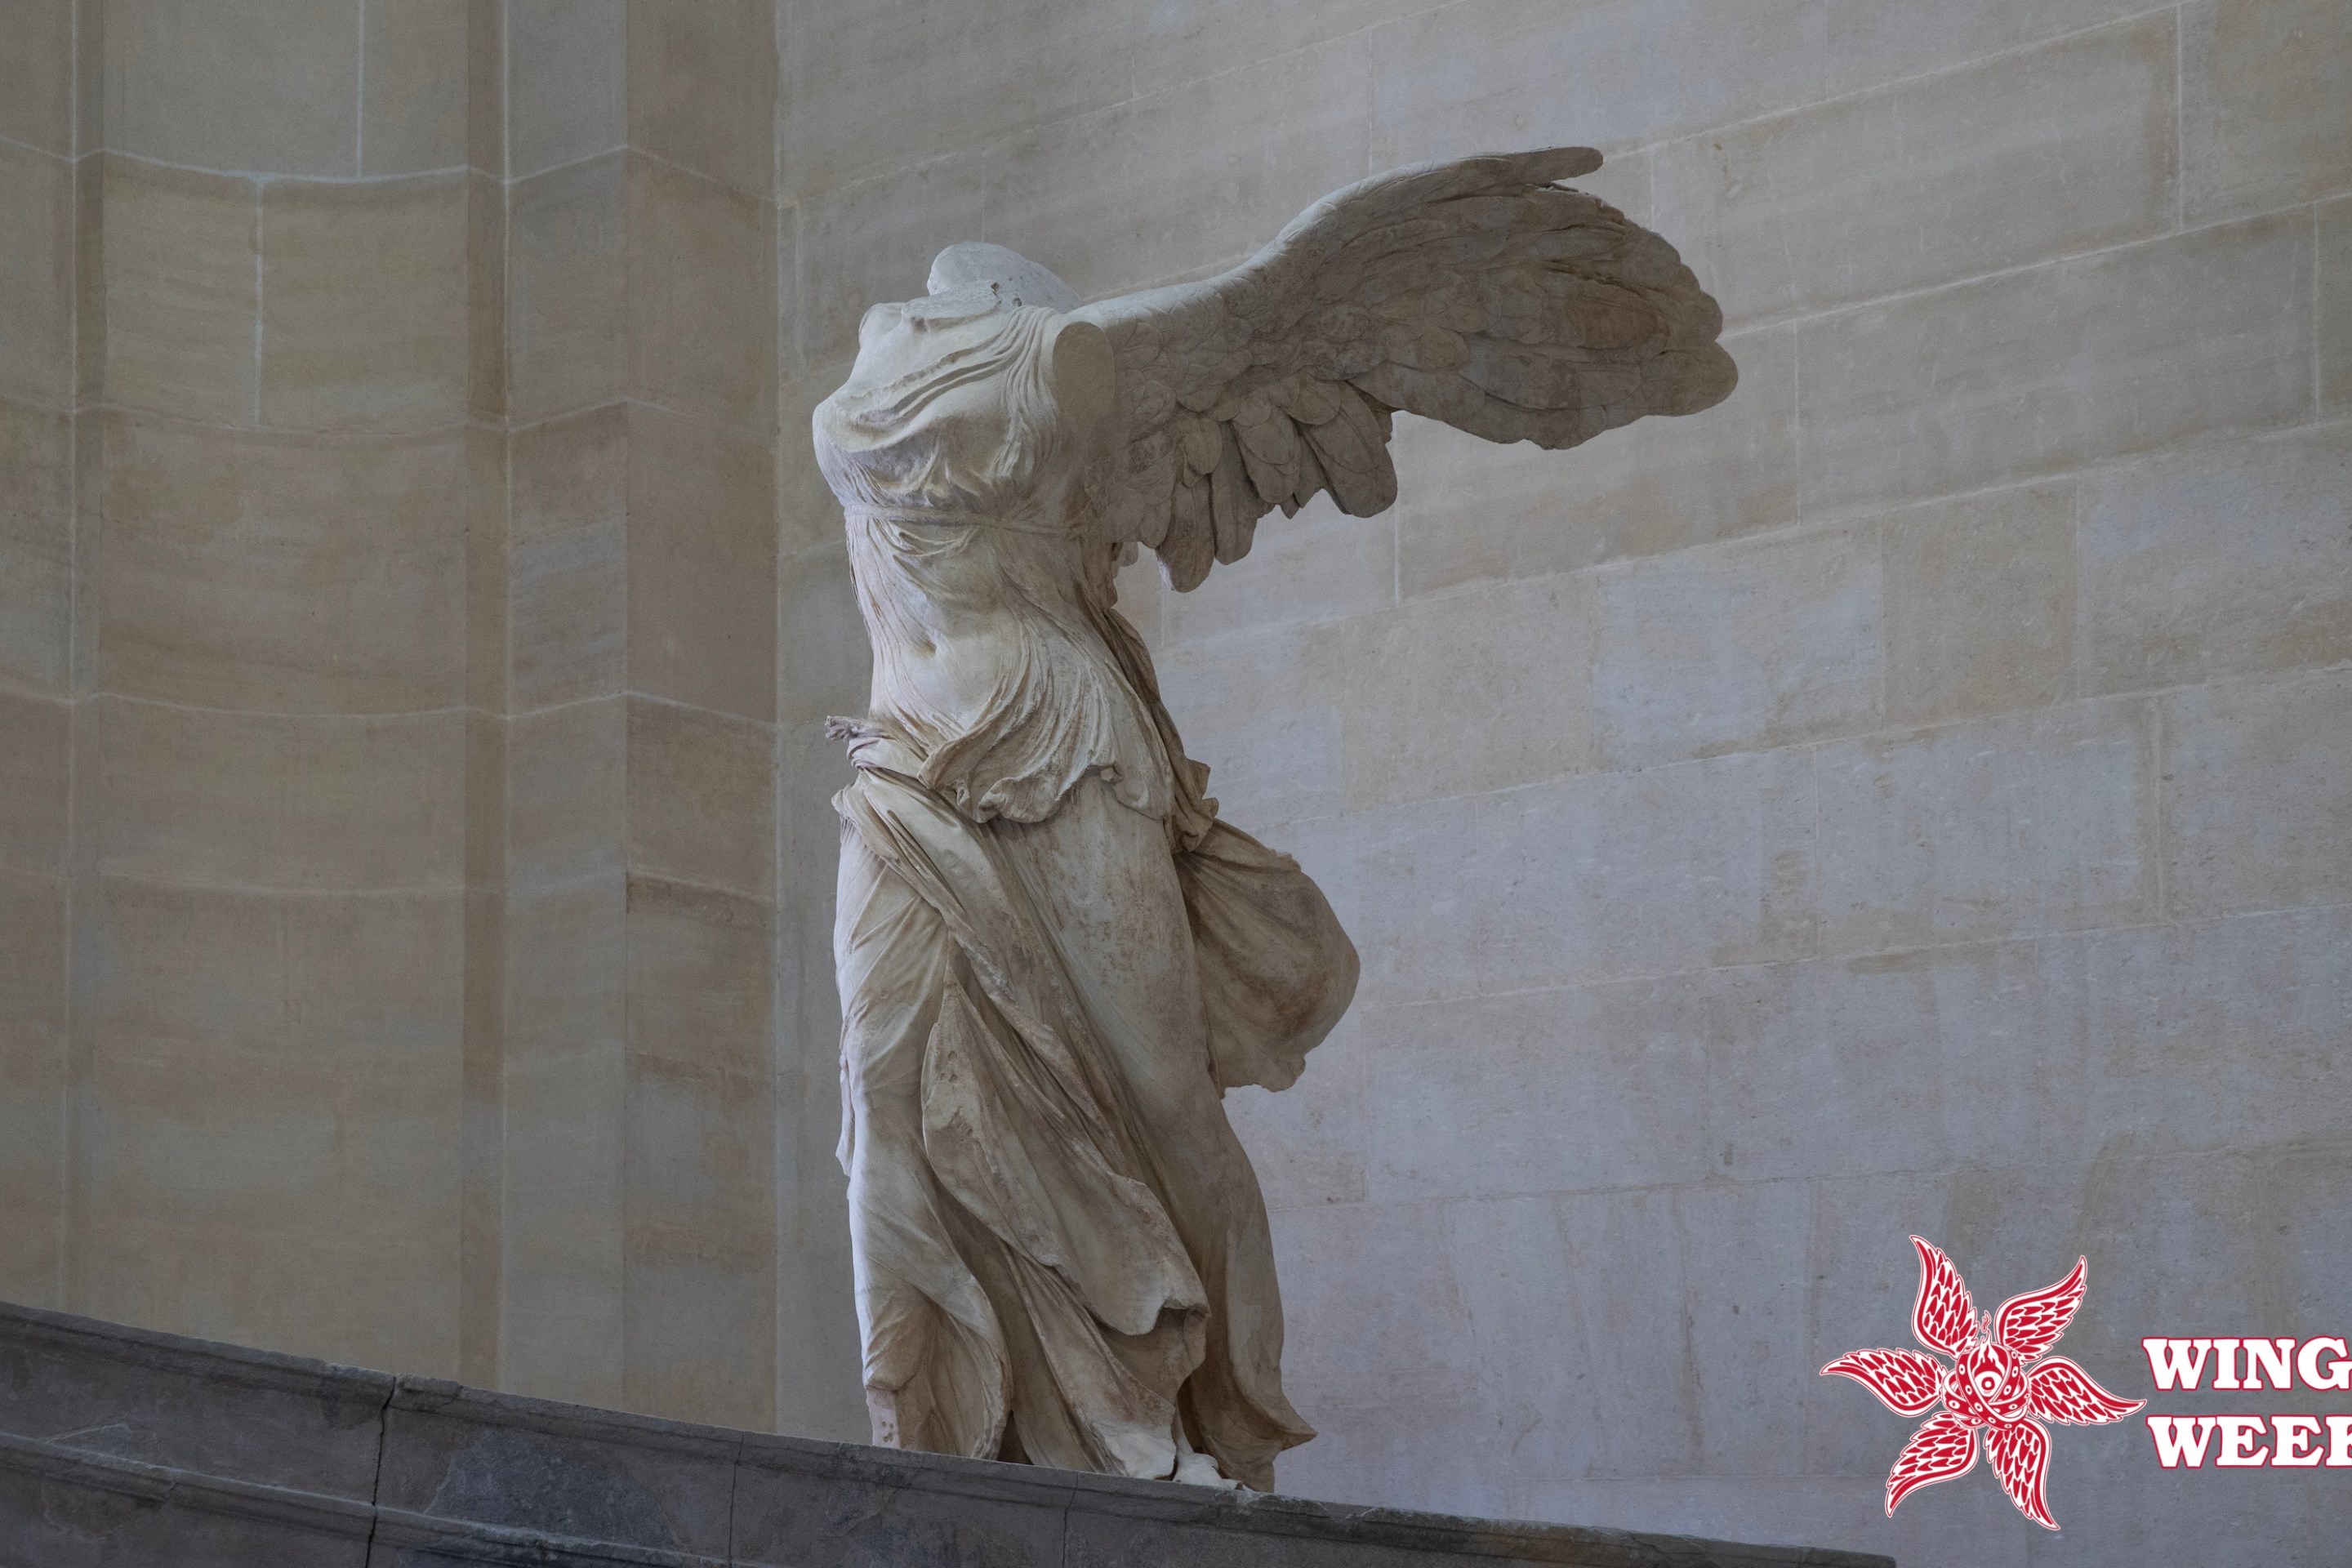 The statue of Victoire de Samothrace portrays the Greek goddess Nike on August 20 in Paris, France. (Photo by Steve Christo/Corbis via Getty Images)